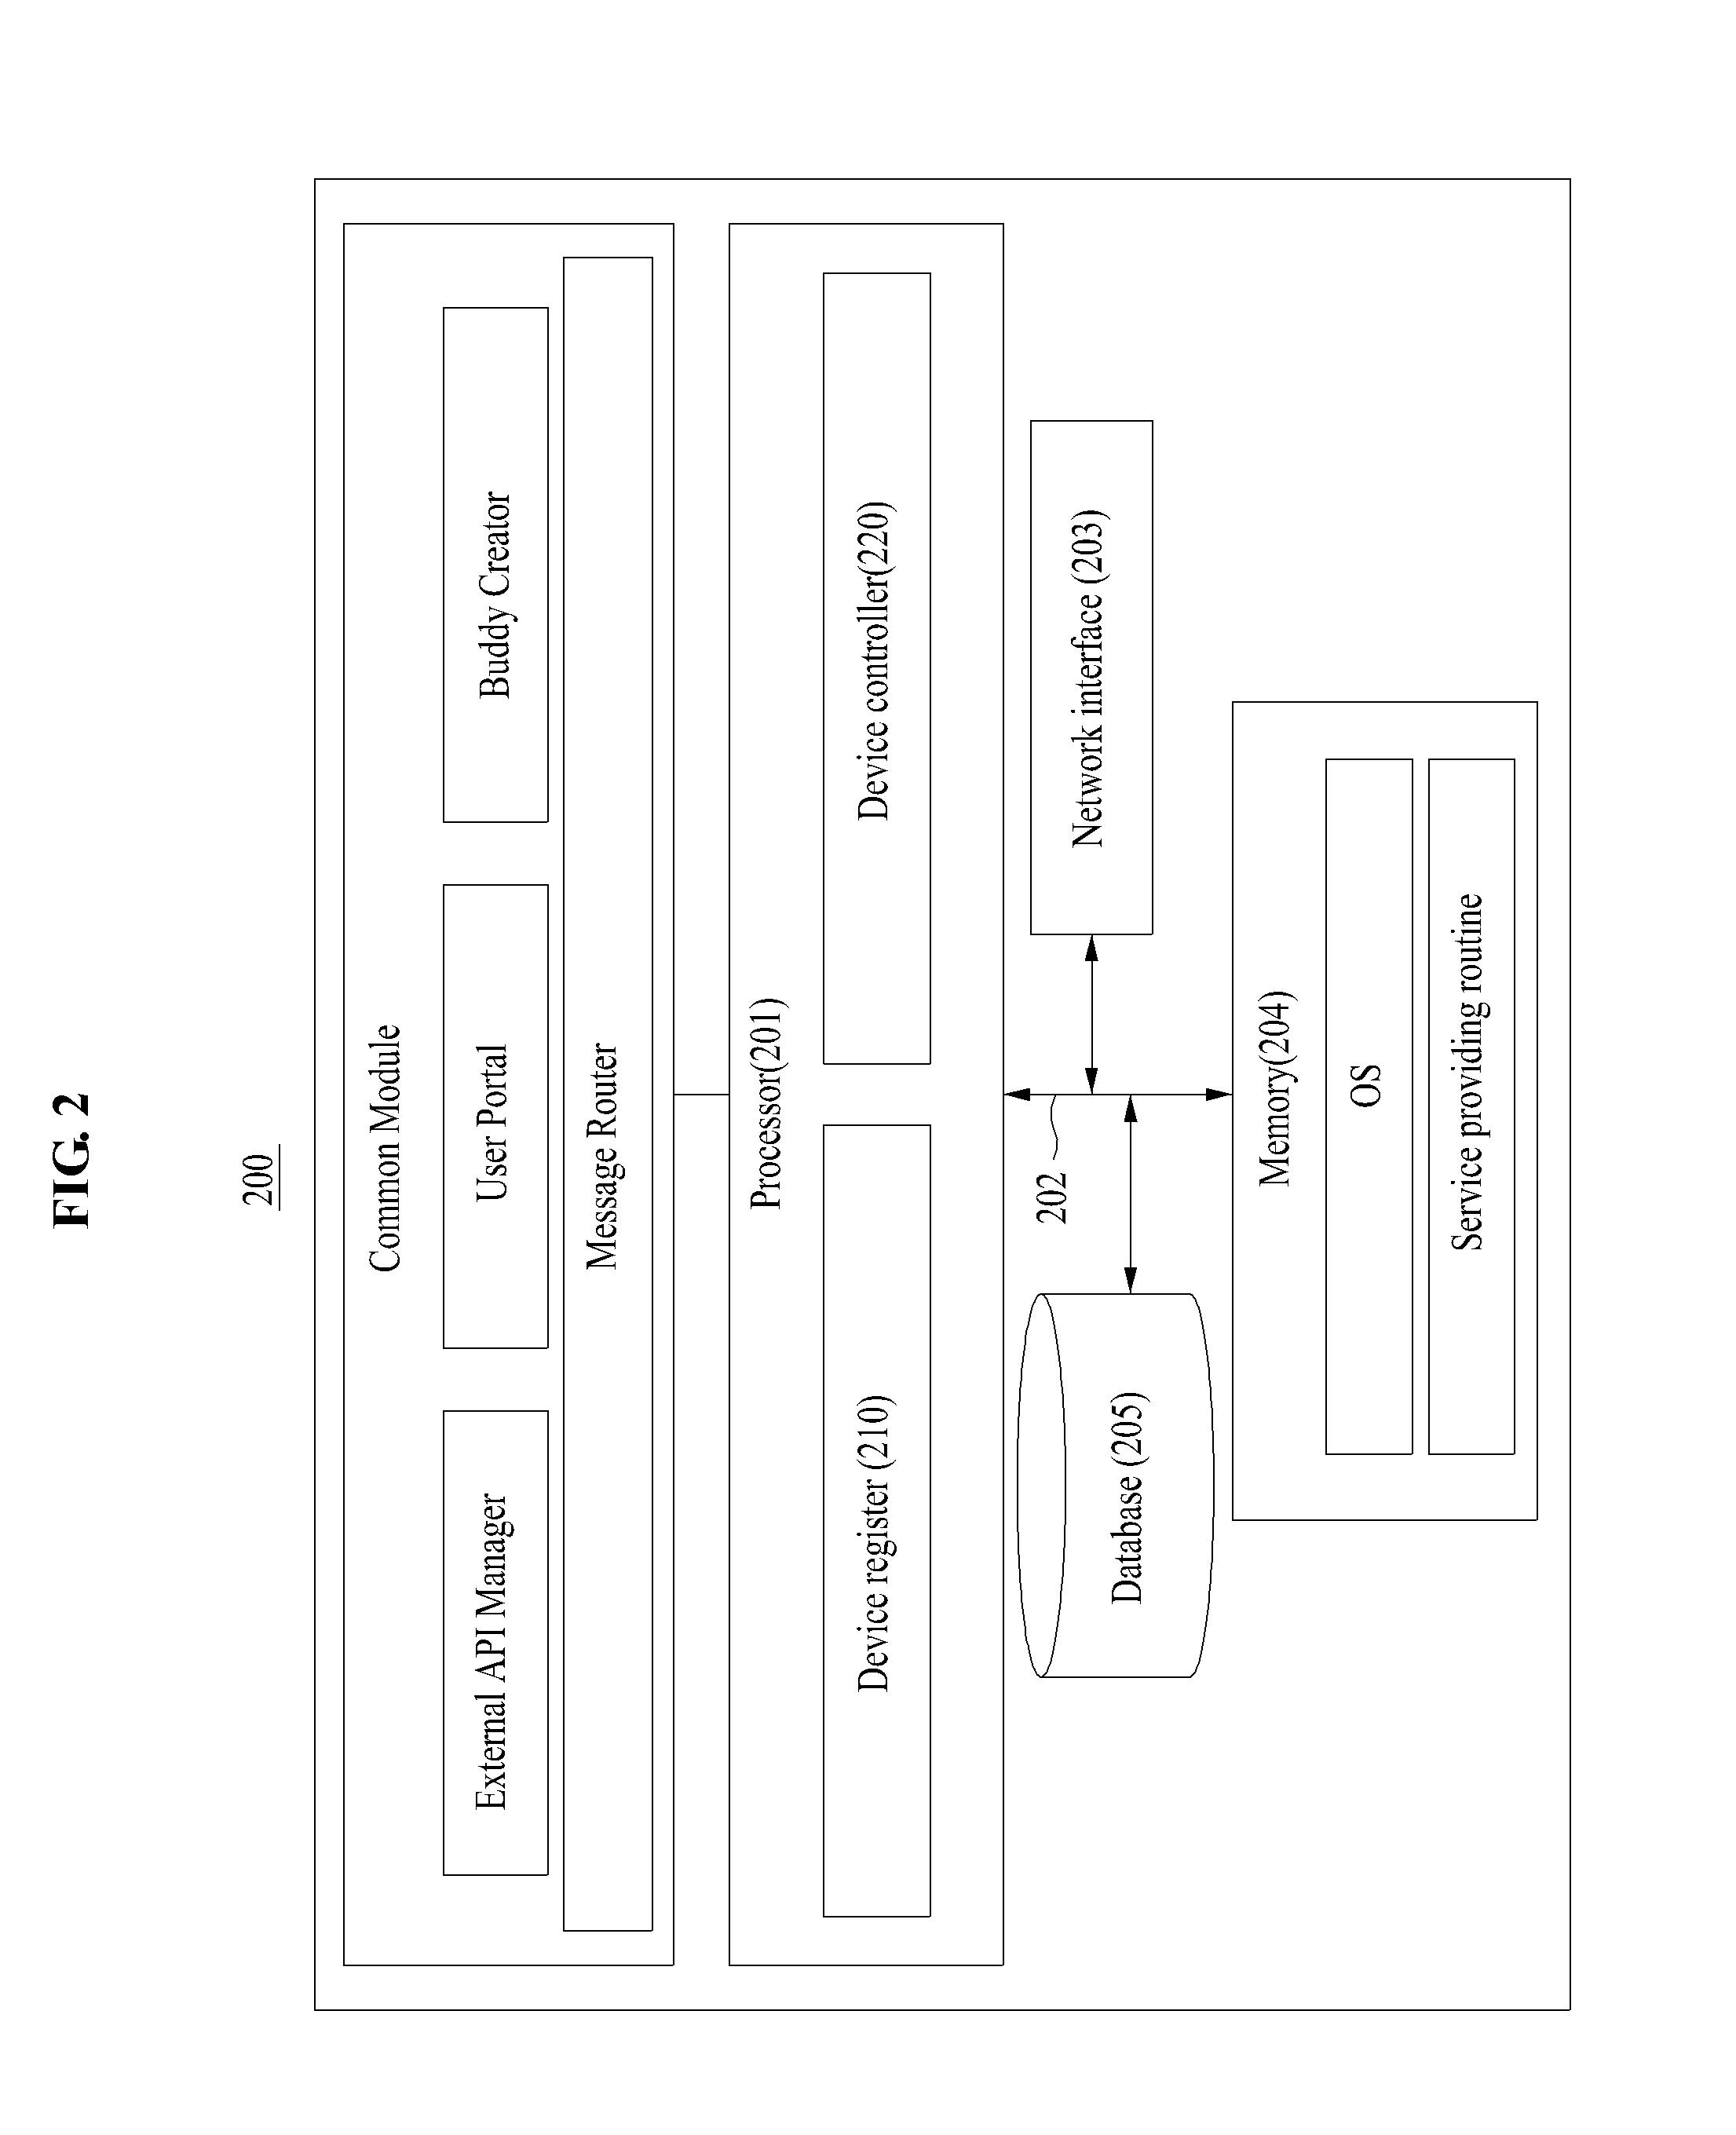 Method and System for Controlling Internet of Things (IoT) Device